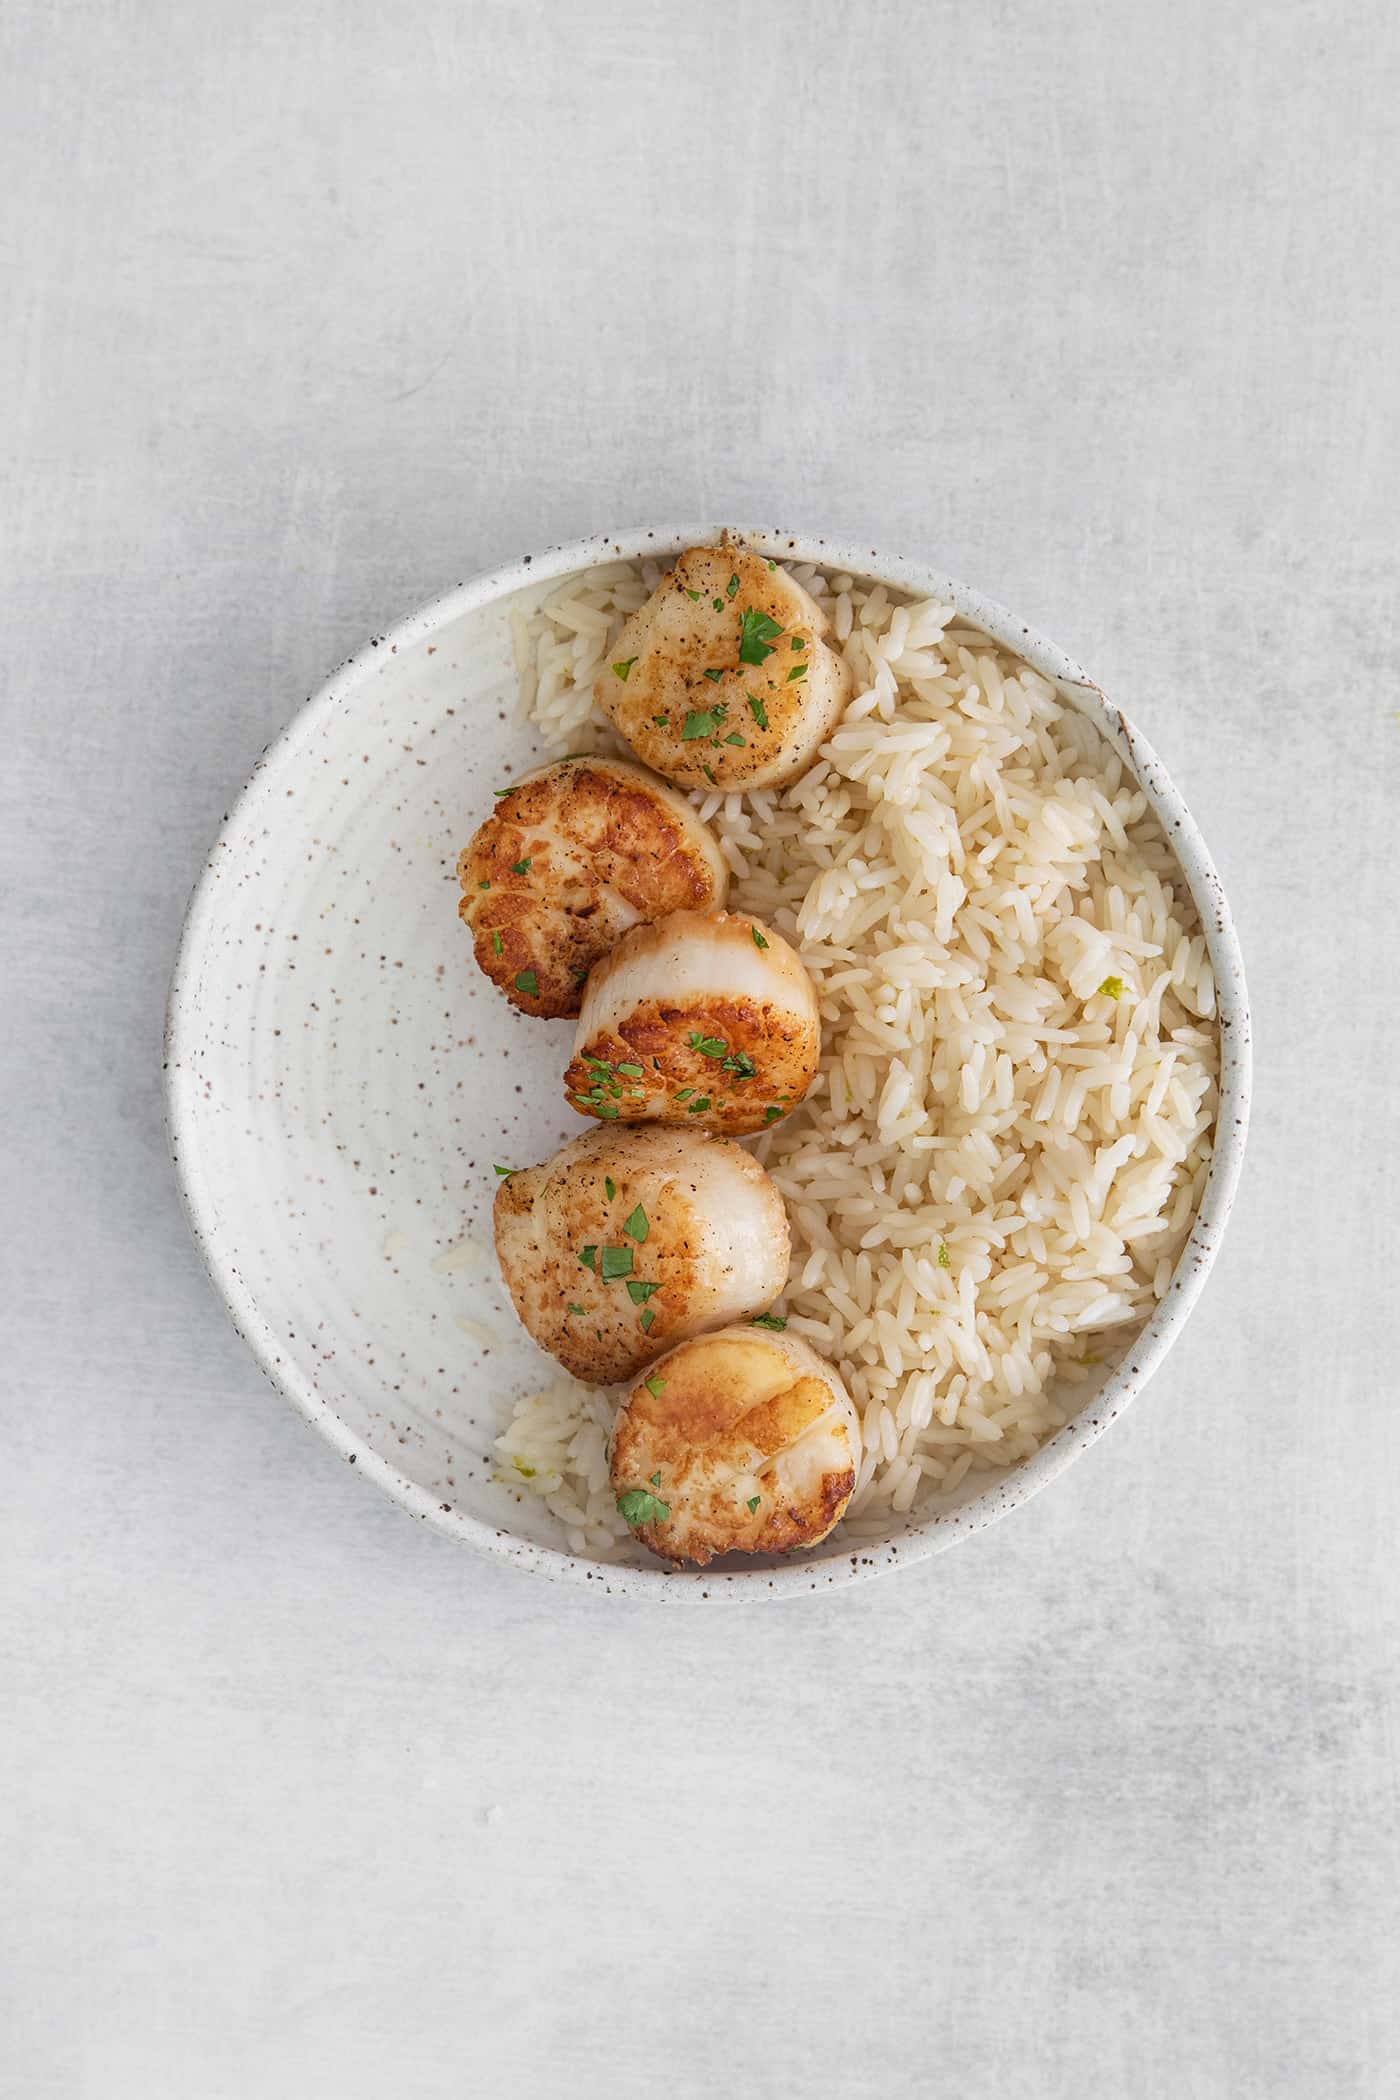 Seared scallops and rice in a bowl